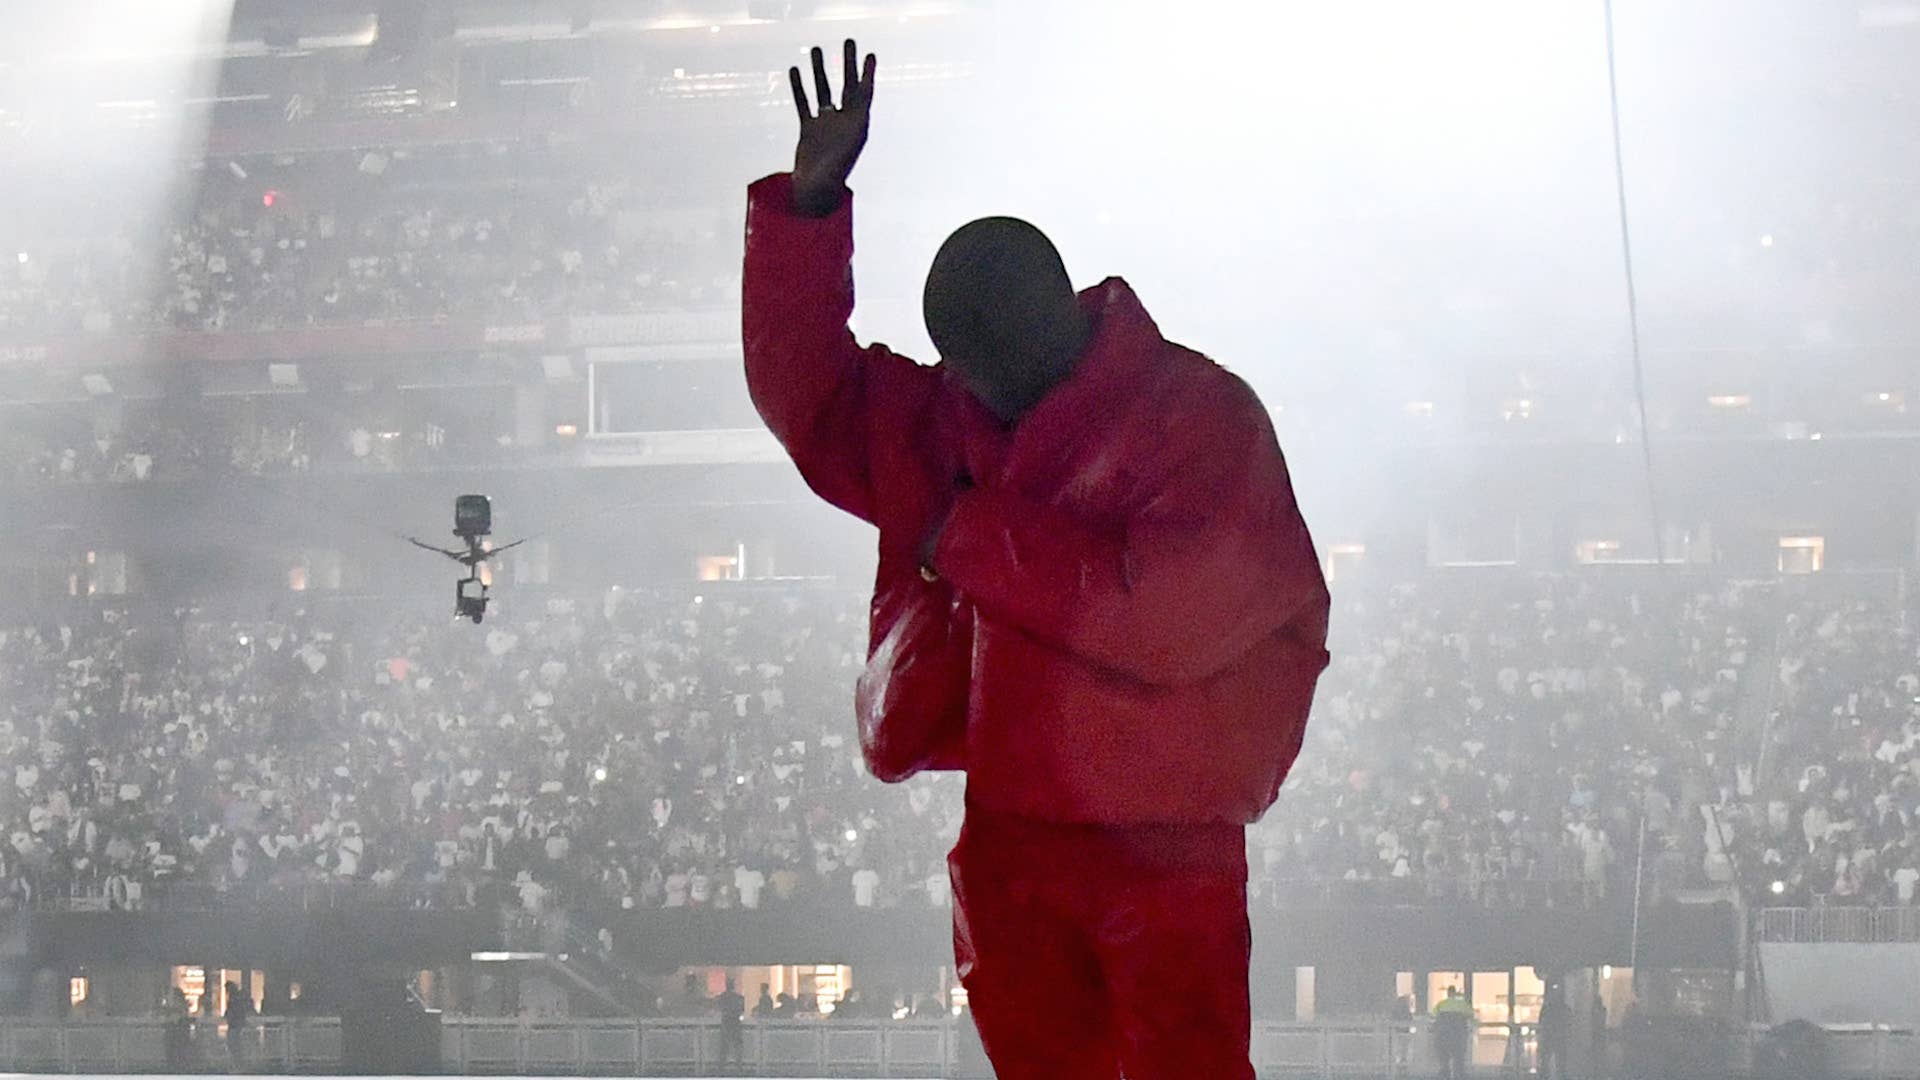 Kanye West is seen at ‘DONDA by Kanye West’ listening event at Mercedes-Benz Stadium